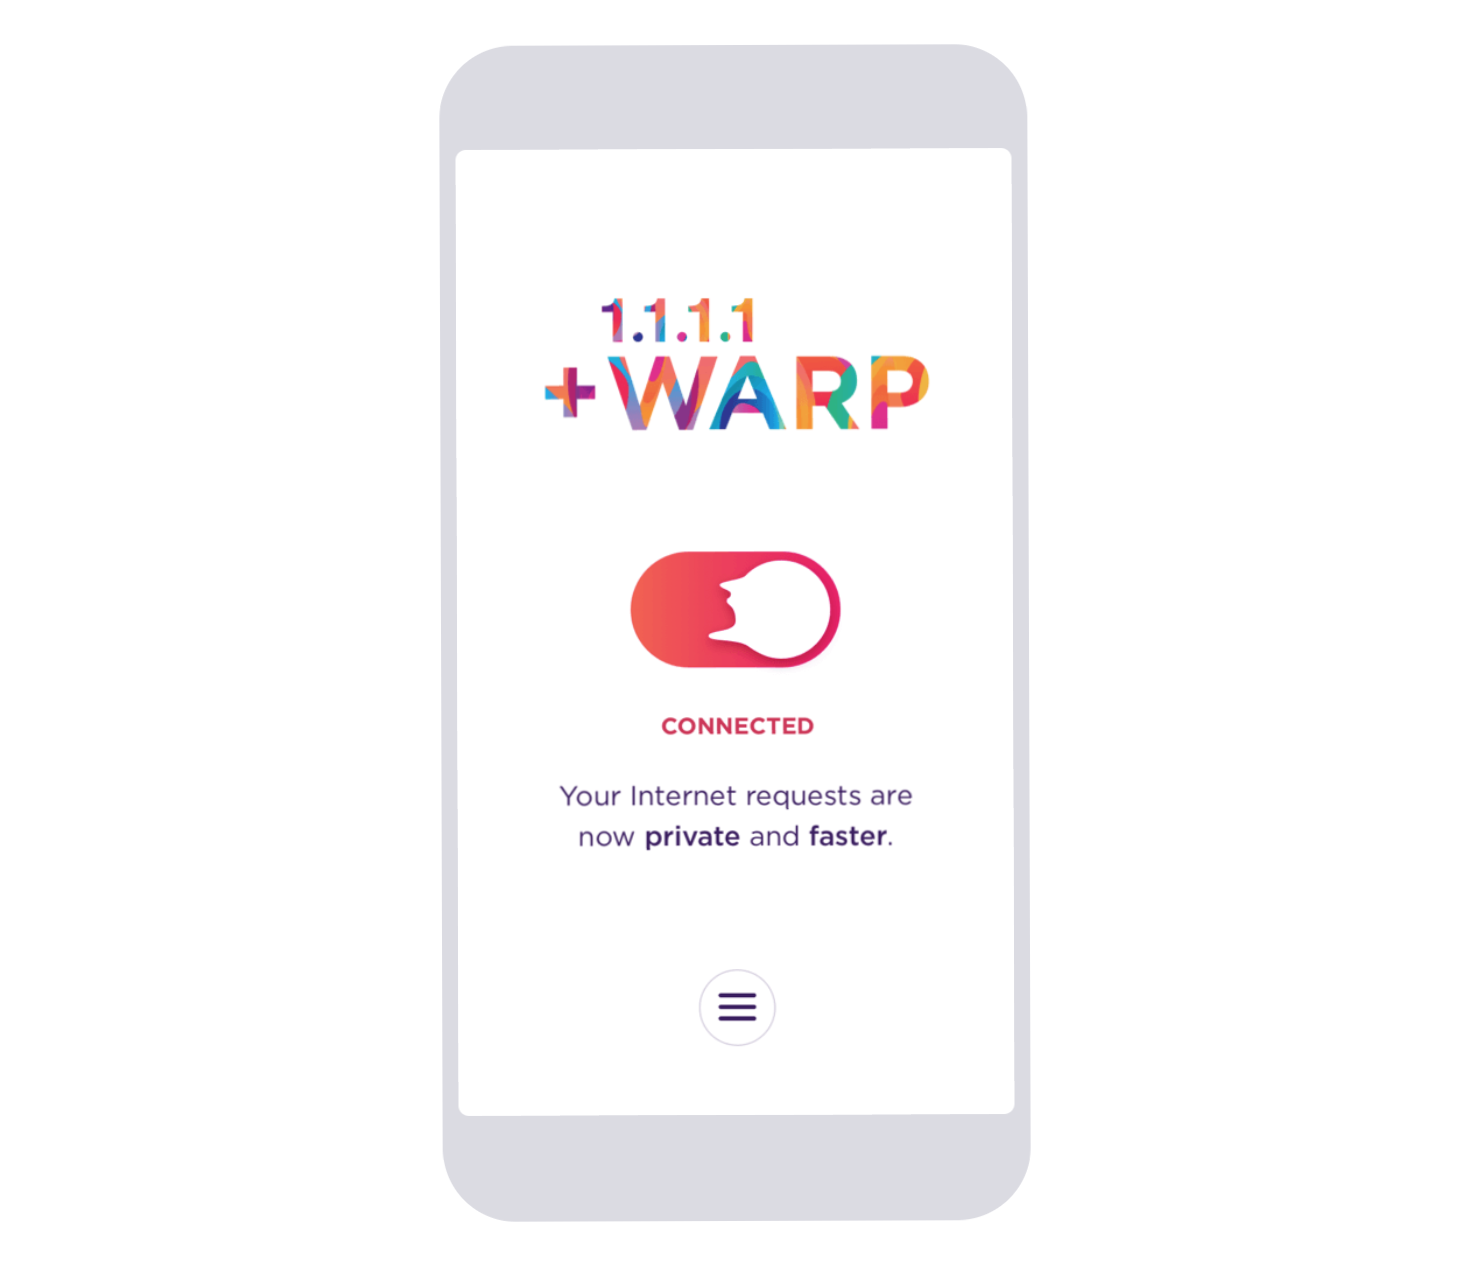 Introducing Warp: Fixing Mobile Internet Performance and Security